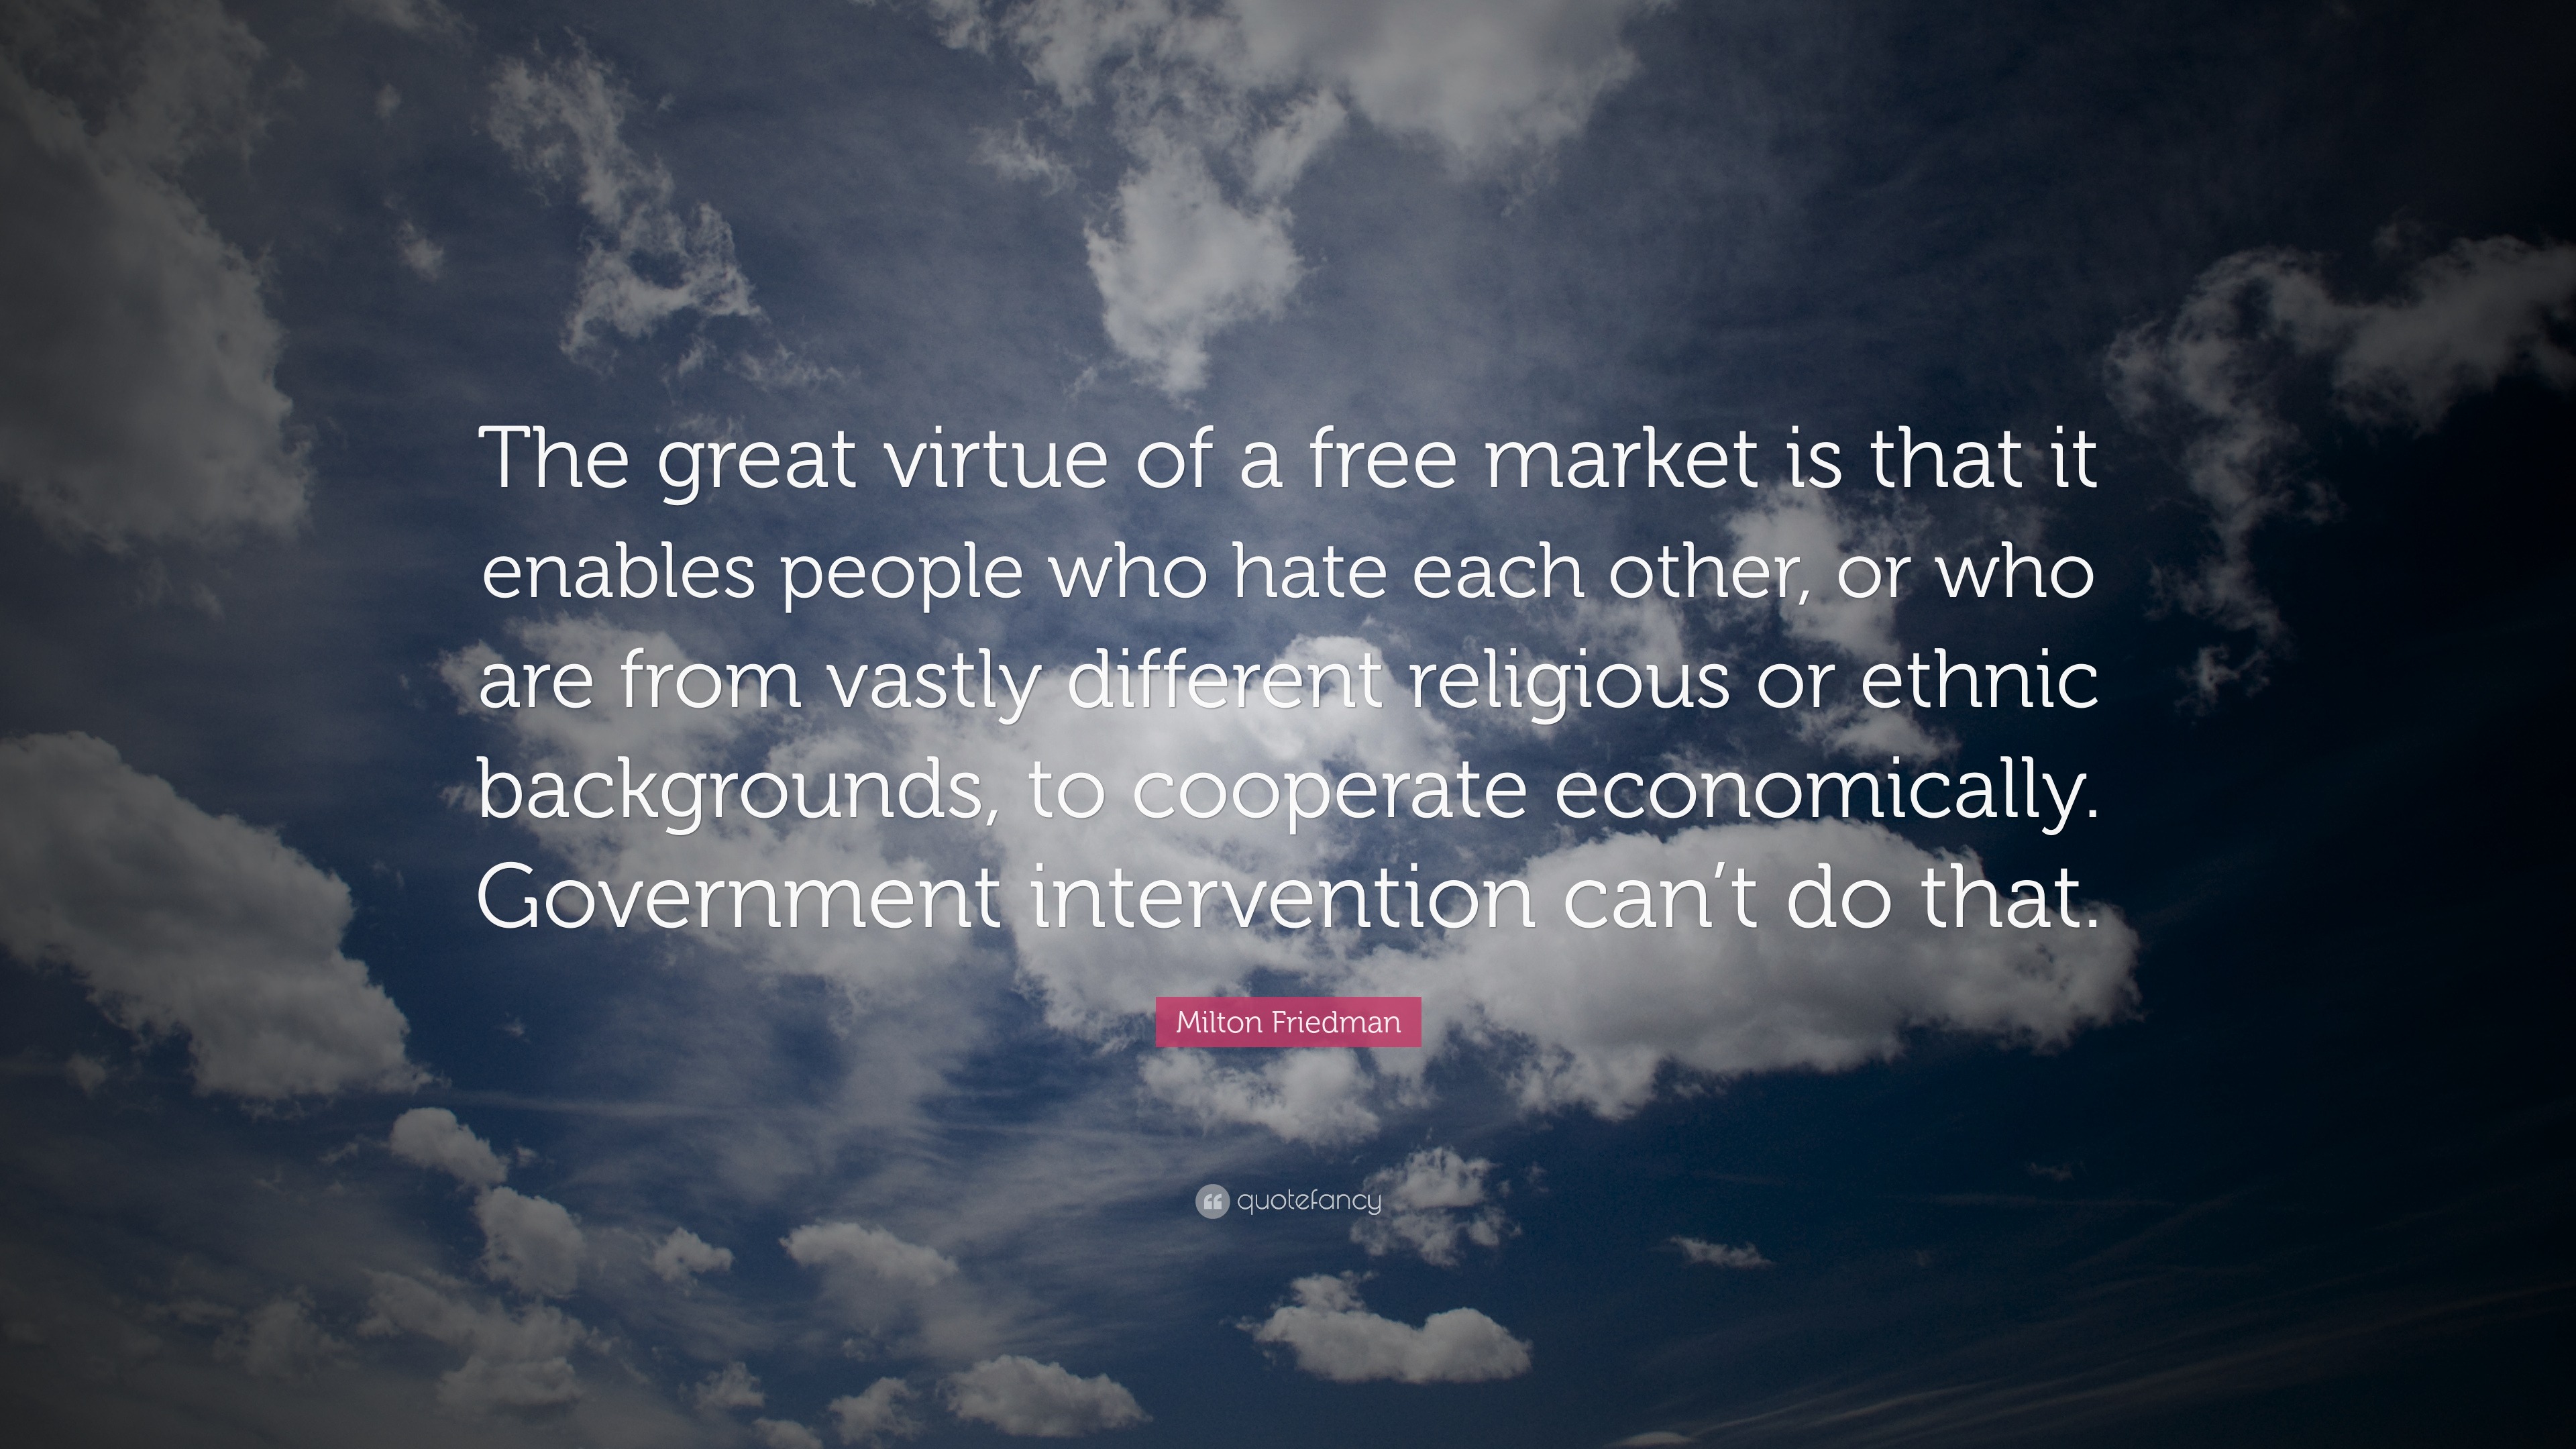 Milton Friedman Quote: “The great virtue of a free market is that it  enables people who hate each other, or who are from vastly different  religi...”